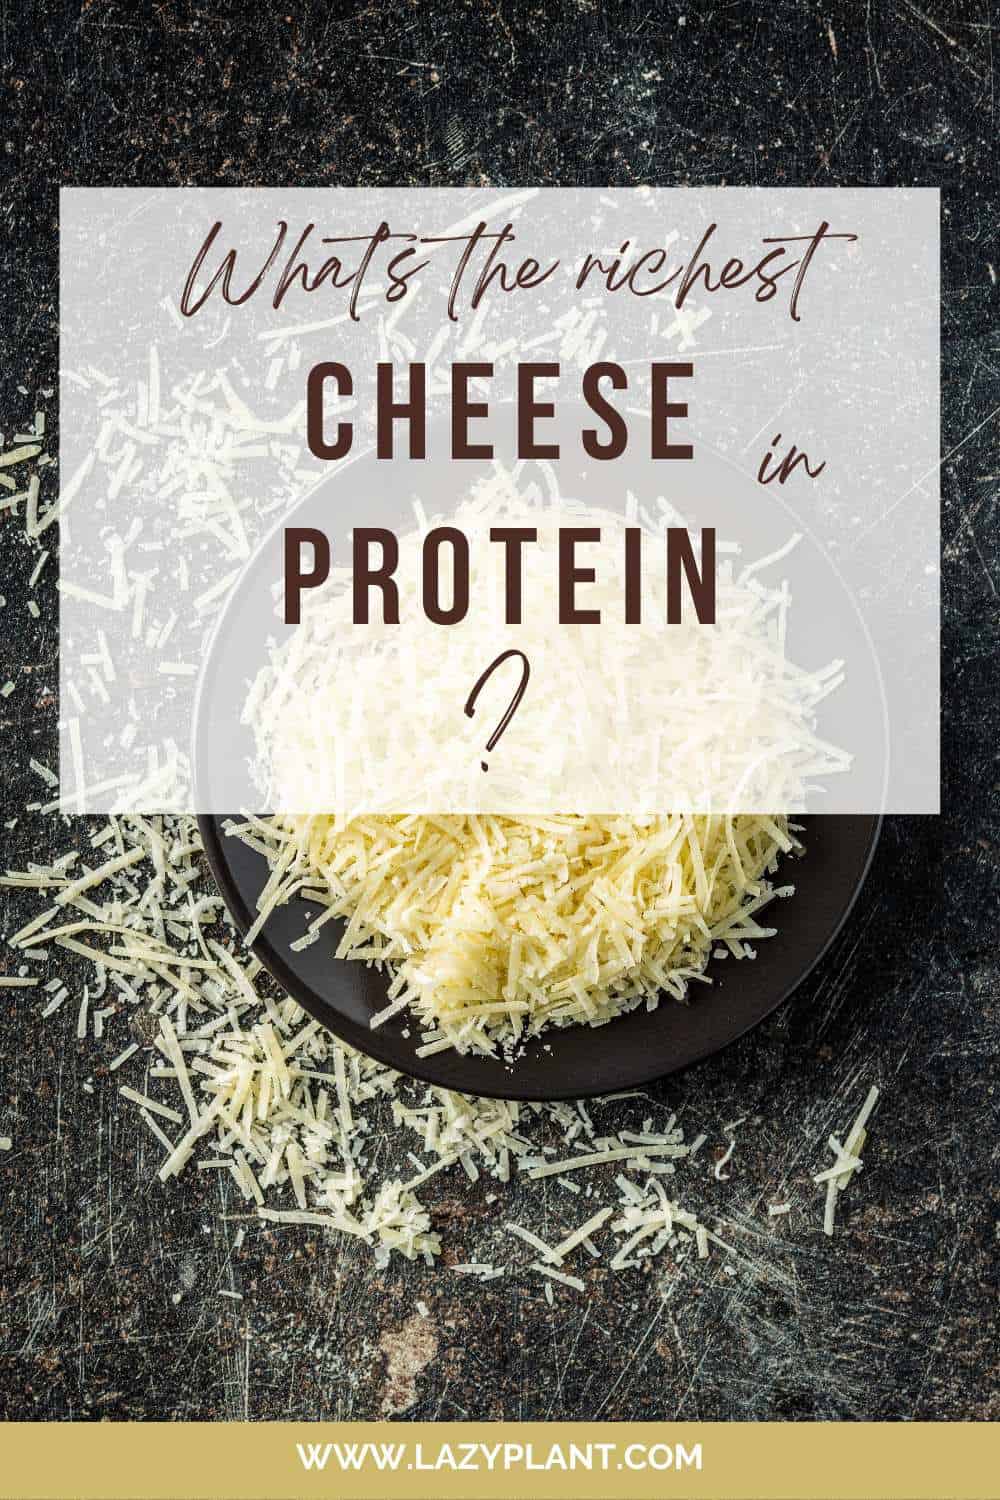 What’s the richest cheese in protein?